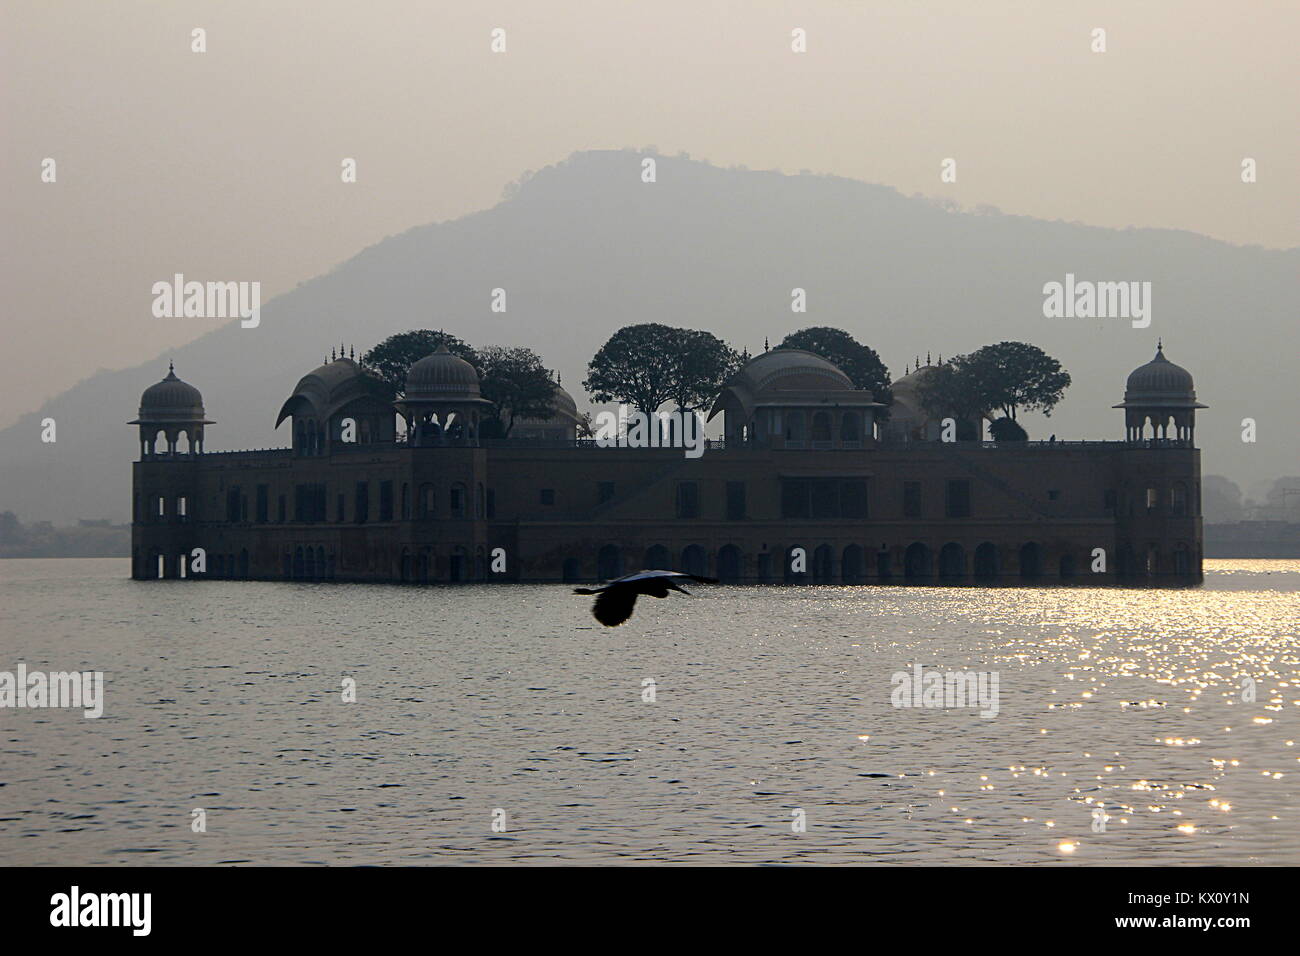 Jalmahal Summer Palace situated in the middle of lake at Jaipur, Rajasthan, India, Asia Stock Photo